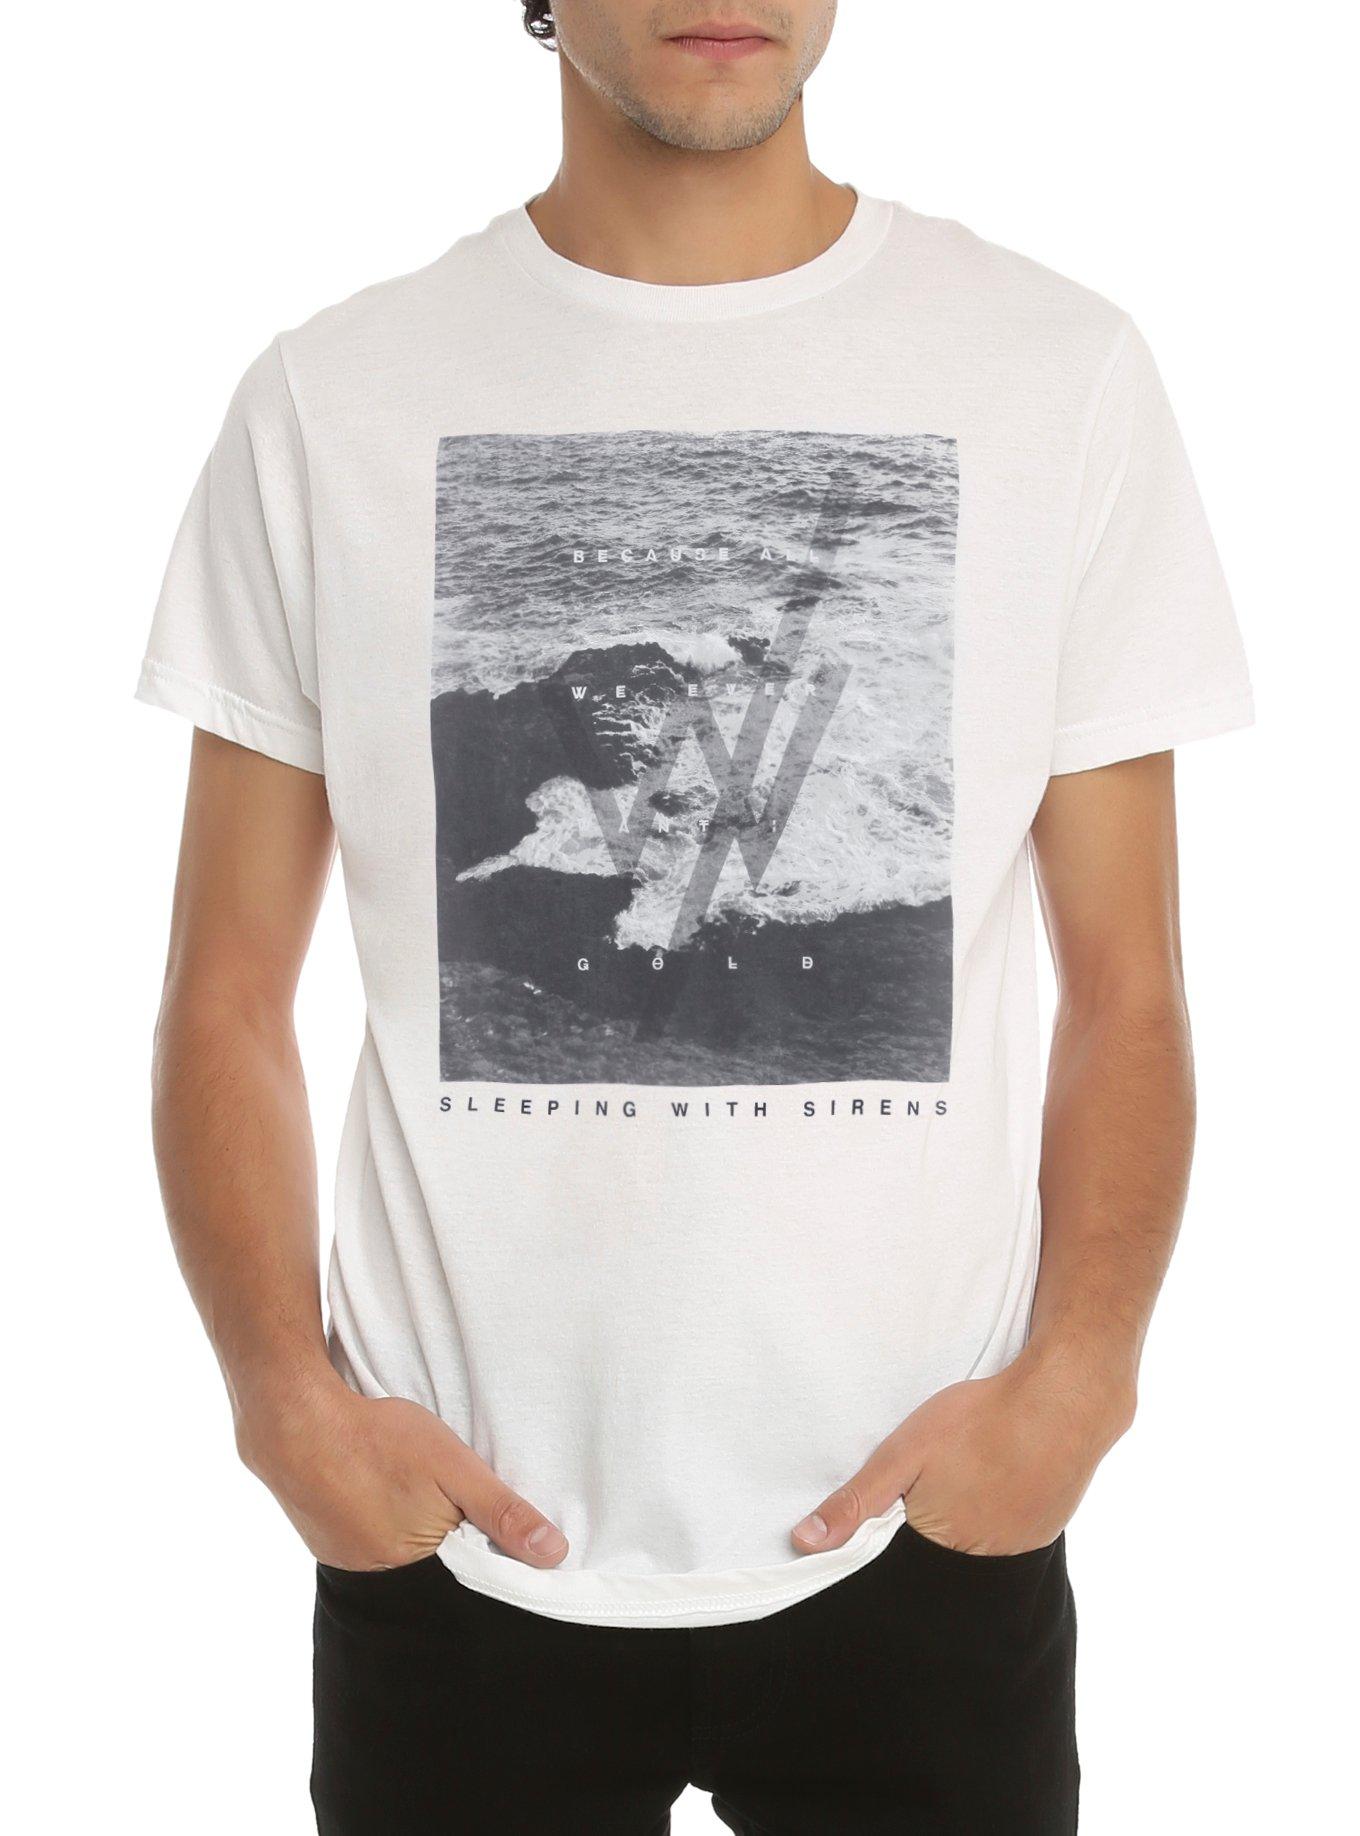 Sleeping With Sirens Current T-Shirt, WHITE, hi-res